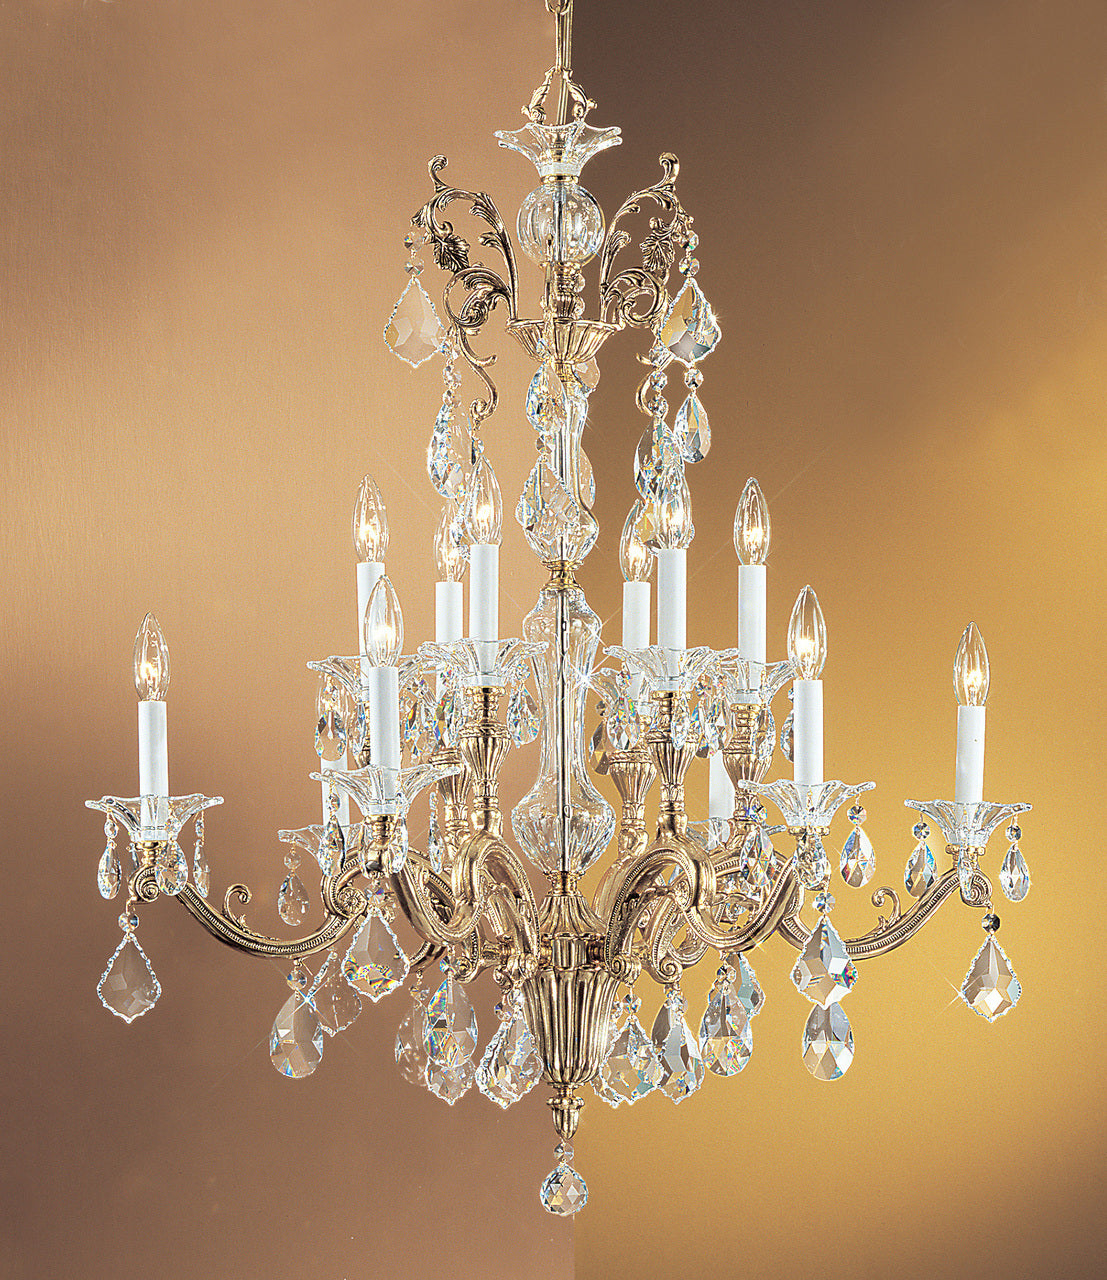 Classic Lighting 57112 BBK IRA Via Firenze Crystal Chandelier in Bronze/Black Patina (Imported from Spain)